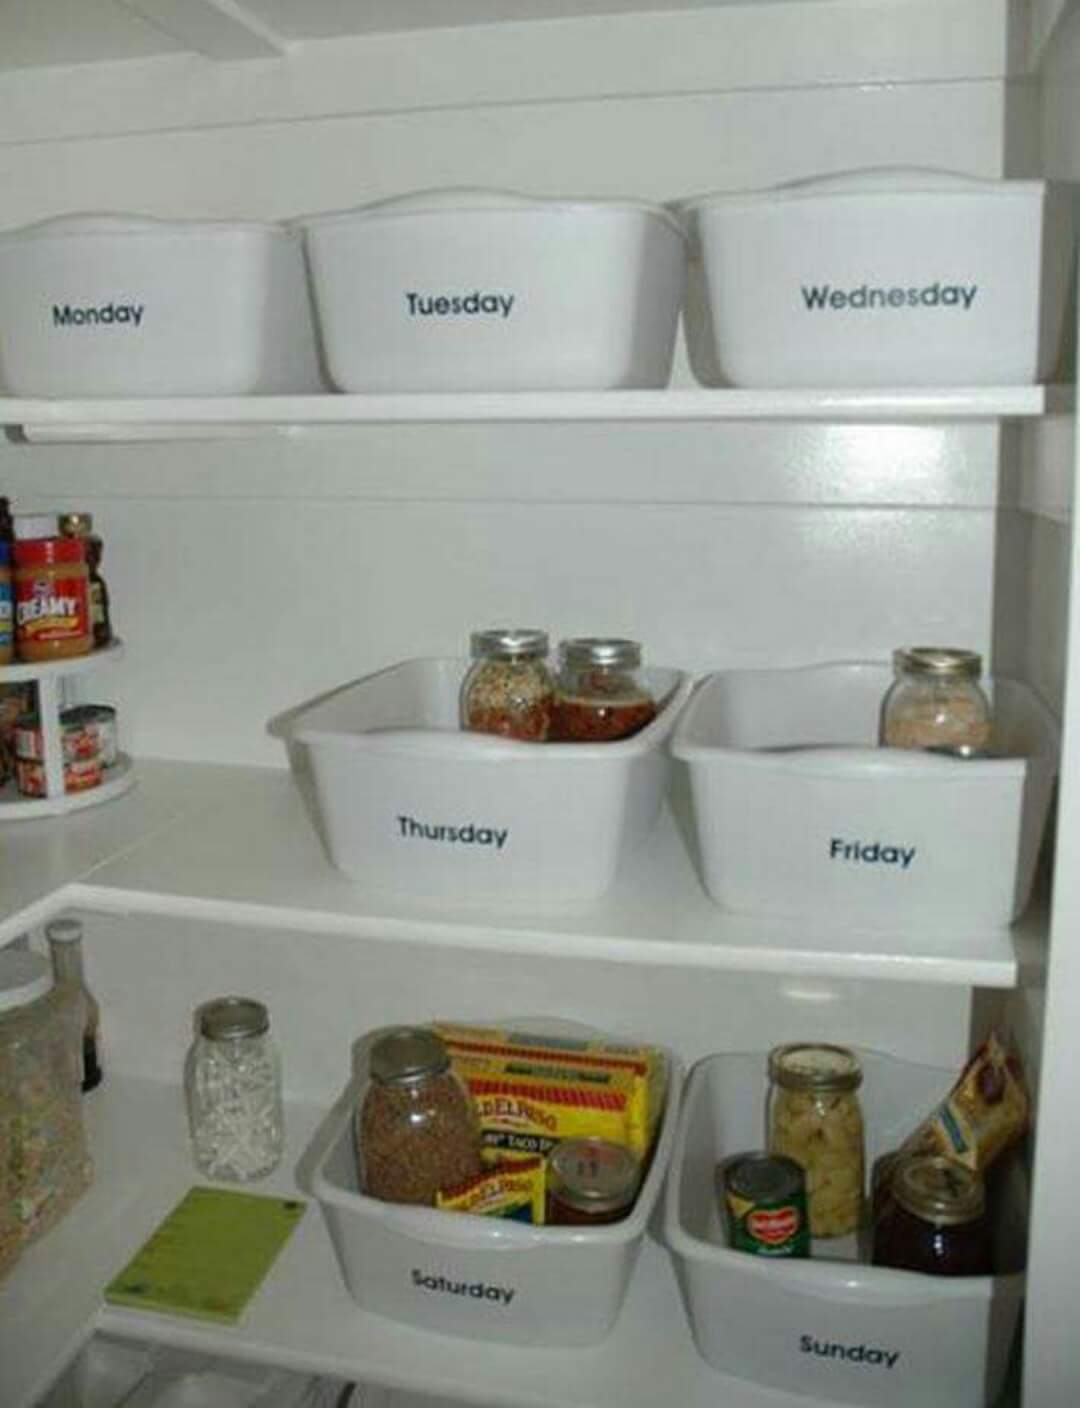 Weekly Meal Organizing Idea | Do It Daily